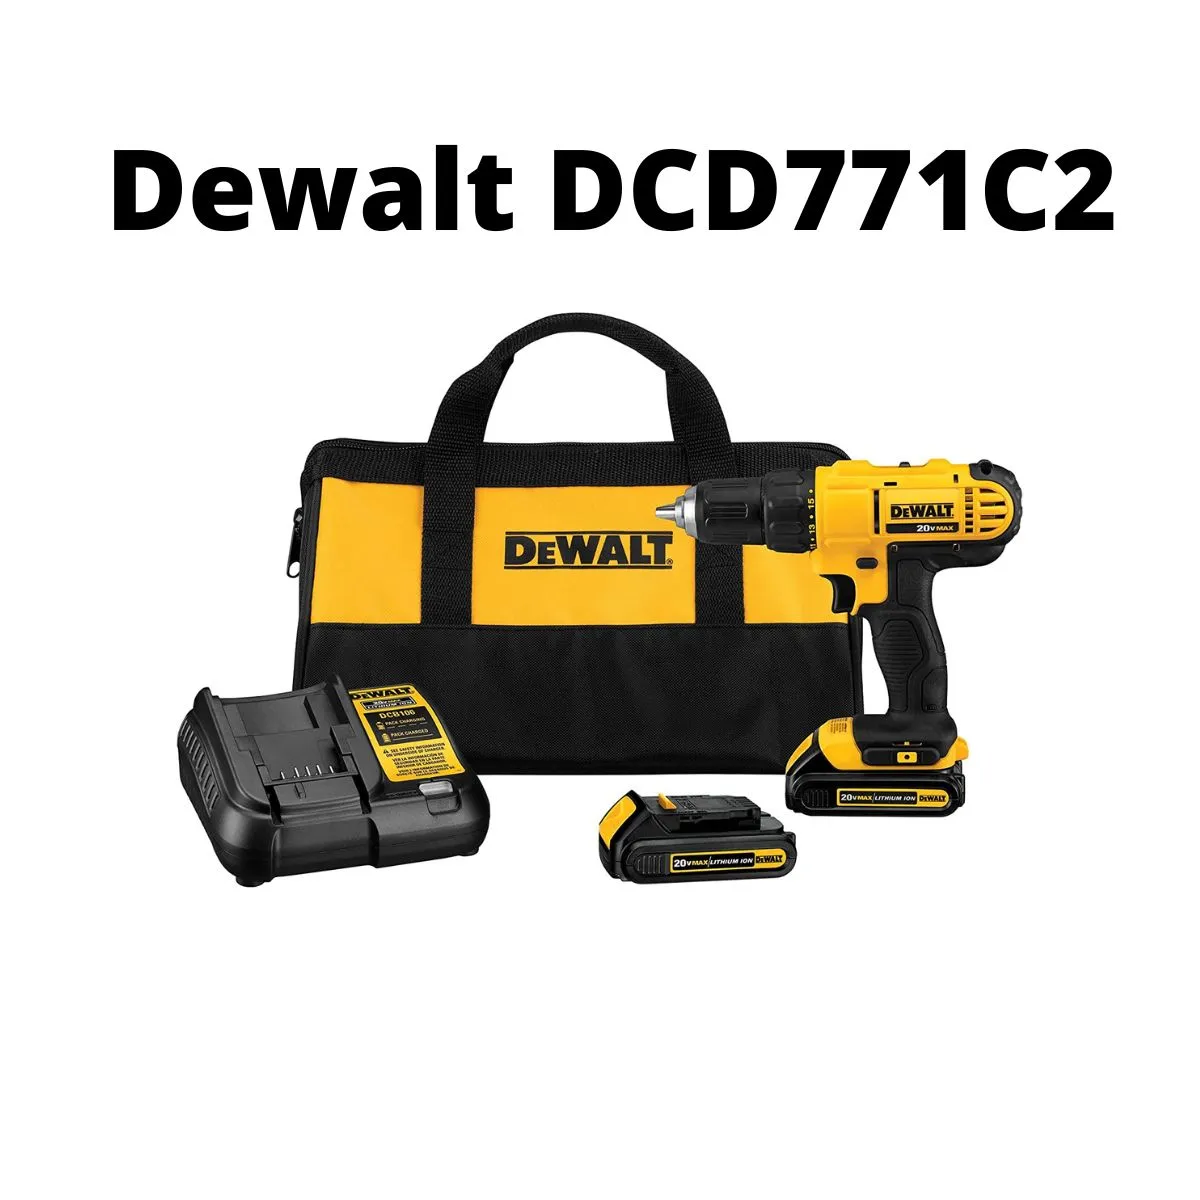 DCD771C2 Cordless Drill Review UK Buying Advice and Reviews